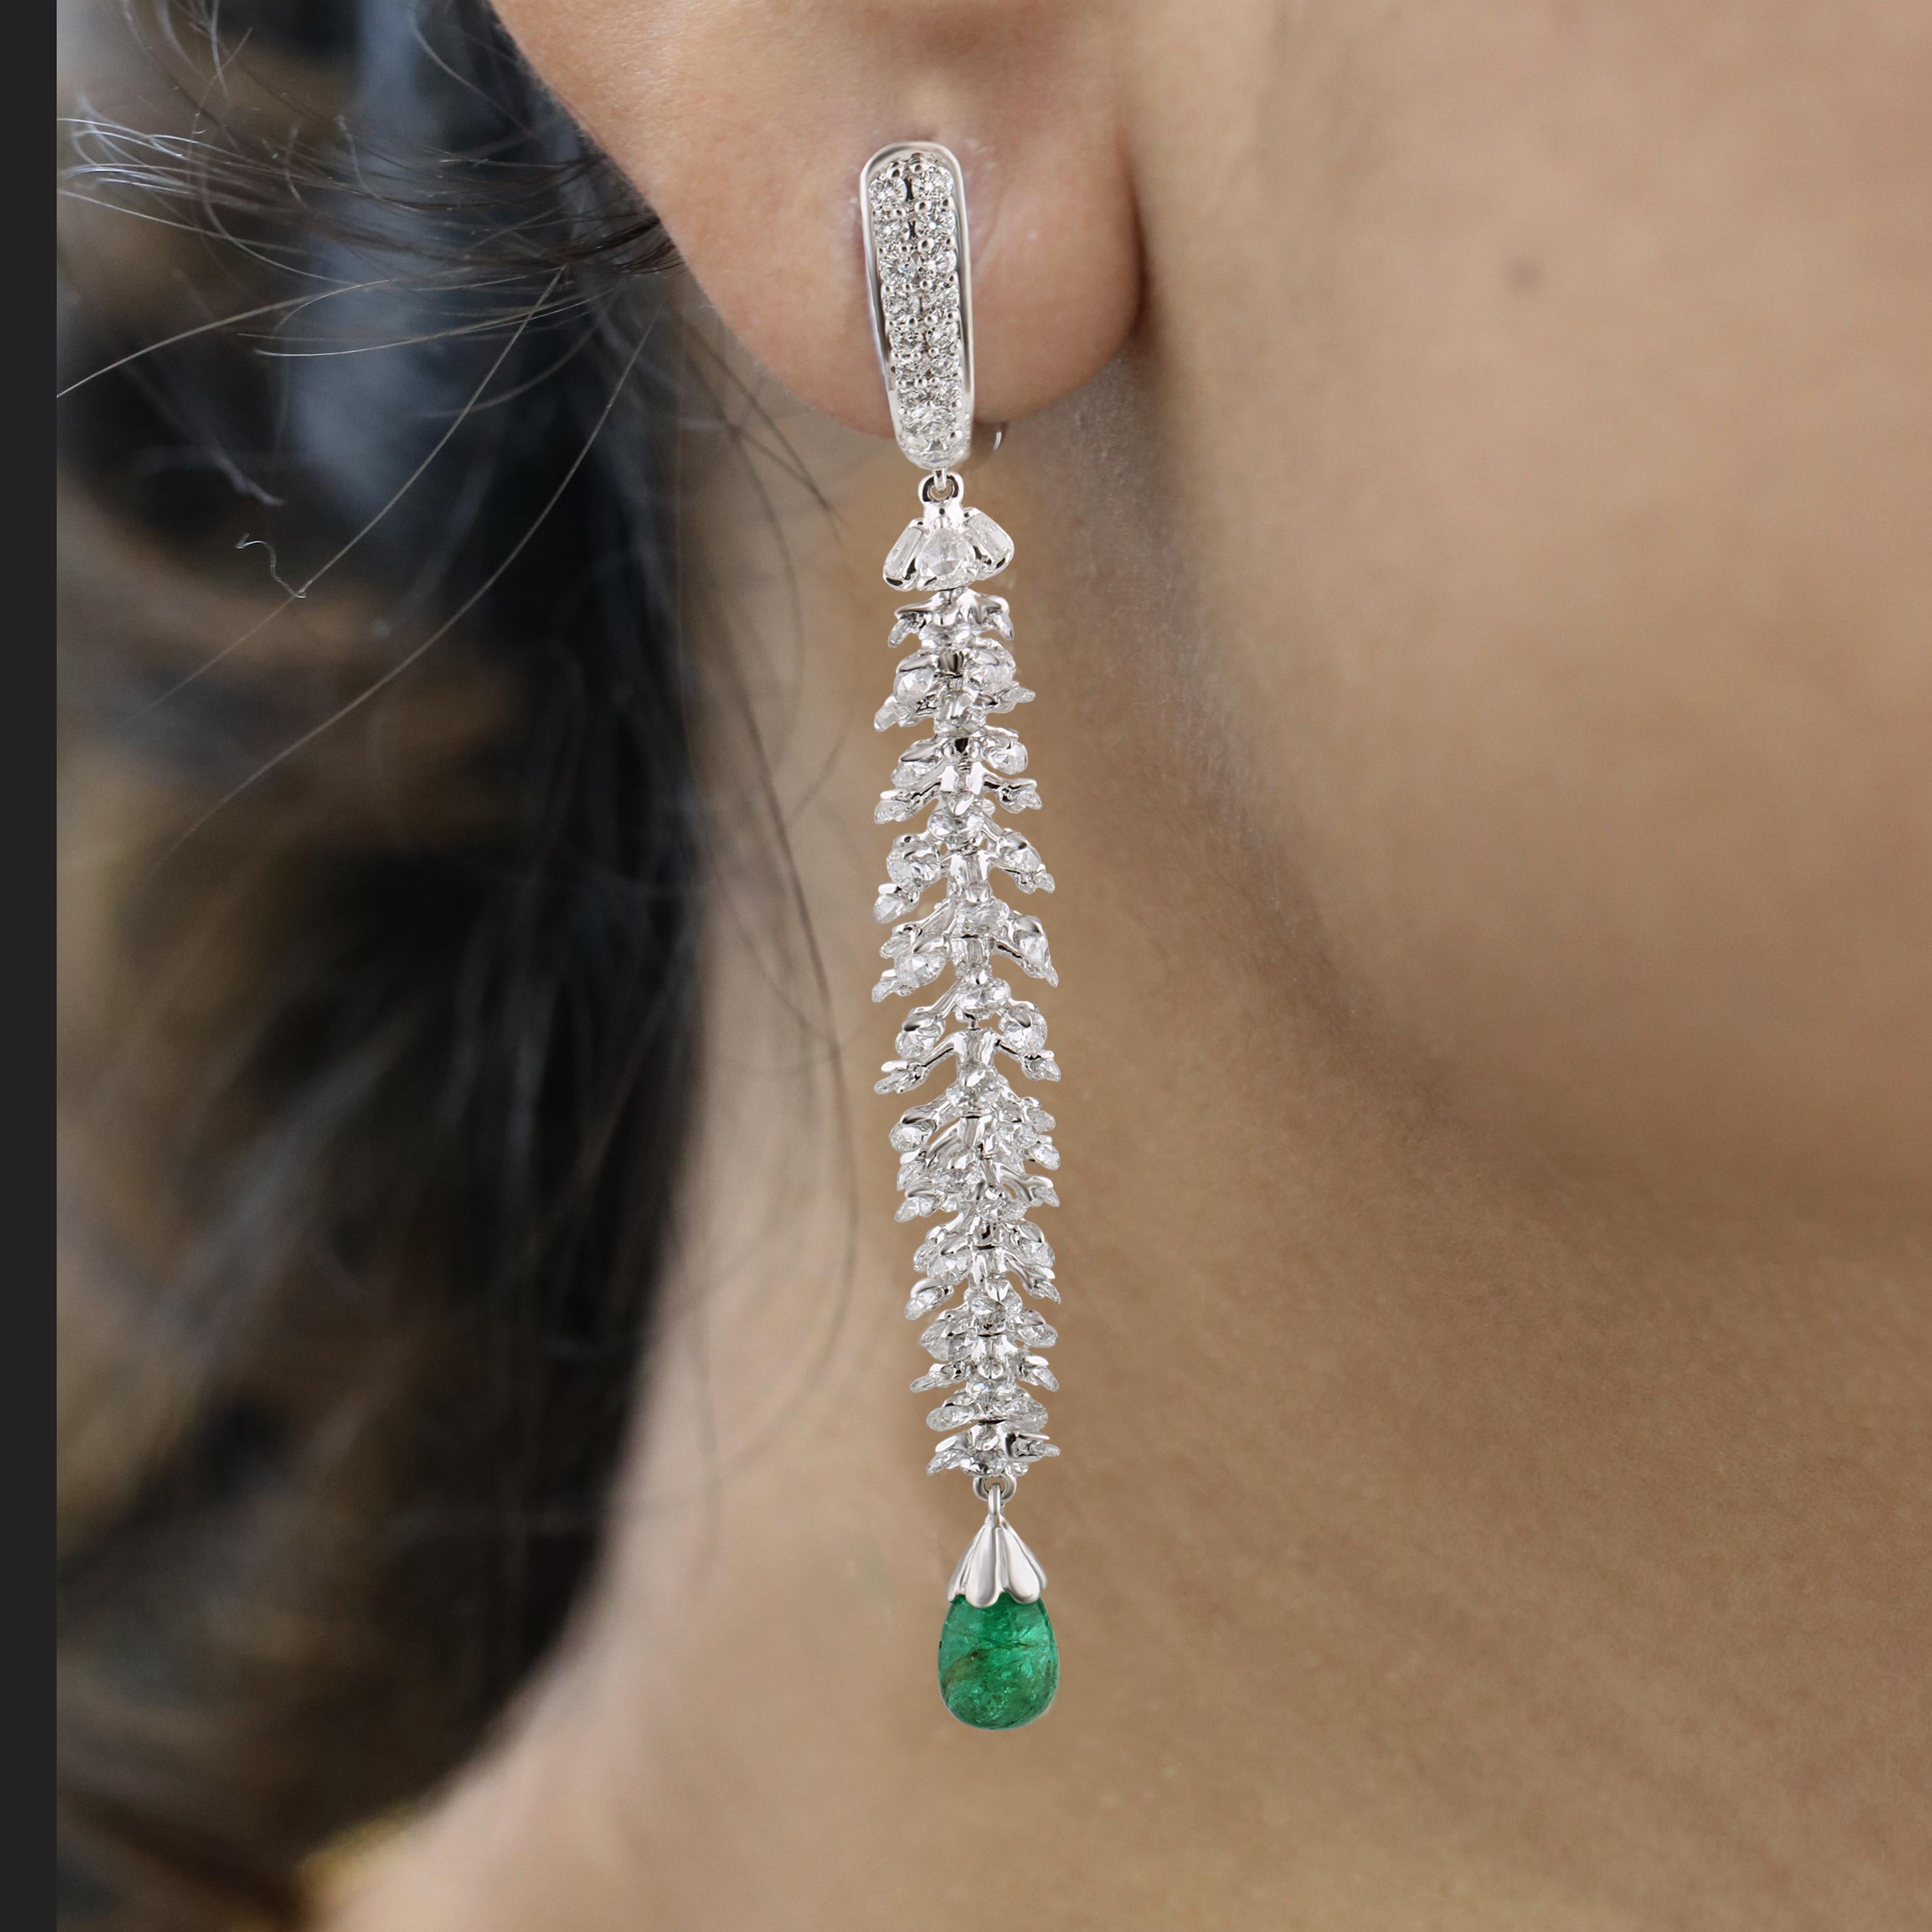 Gross Weight: 10.53 Grams
Diamond Weight: 4.52 cts
Emerald Weight: 2.95 cts
IGI Certification can be done on request

Video of the product can be shared on request.

The simplicity and elegance of a sleek pair of danglers is embodied by this